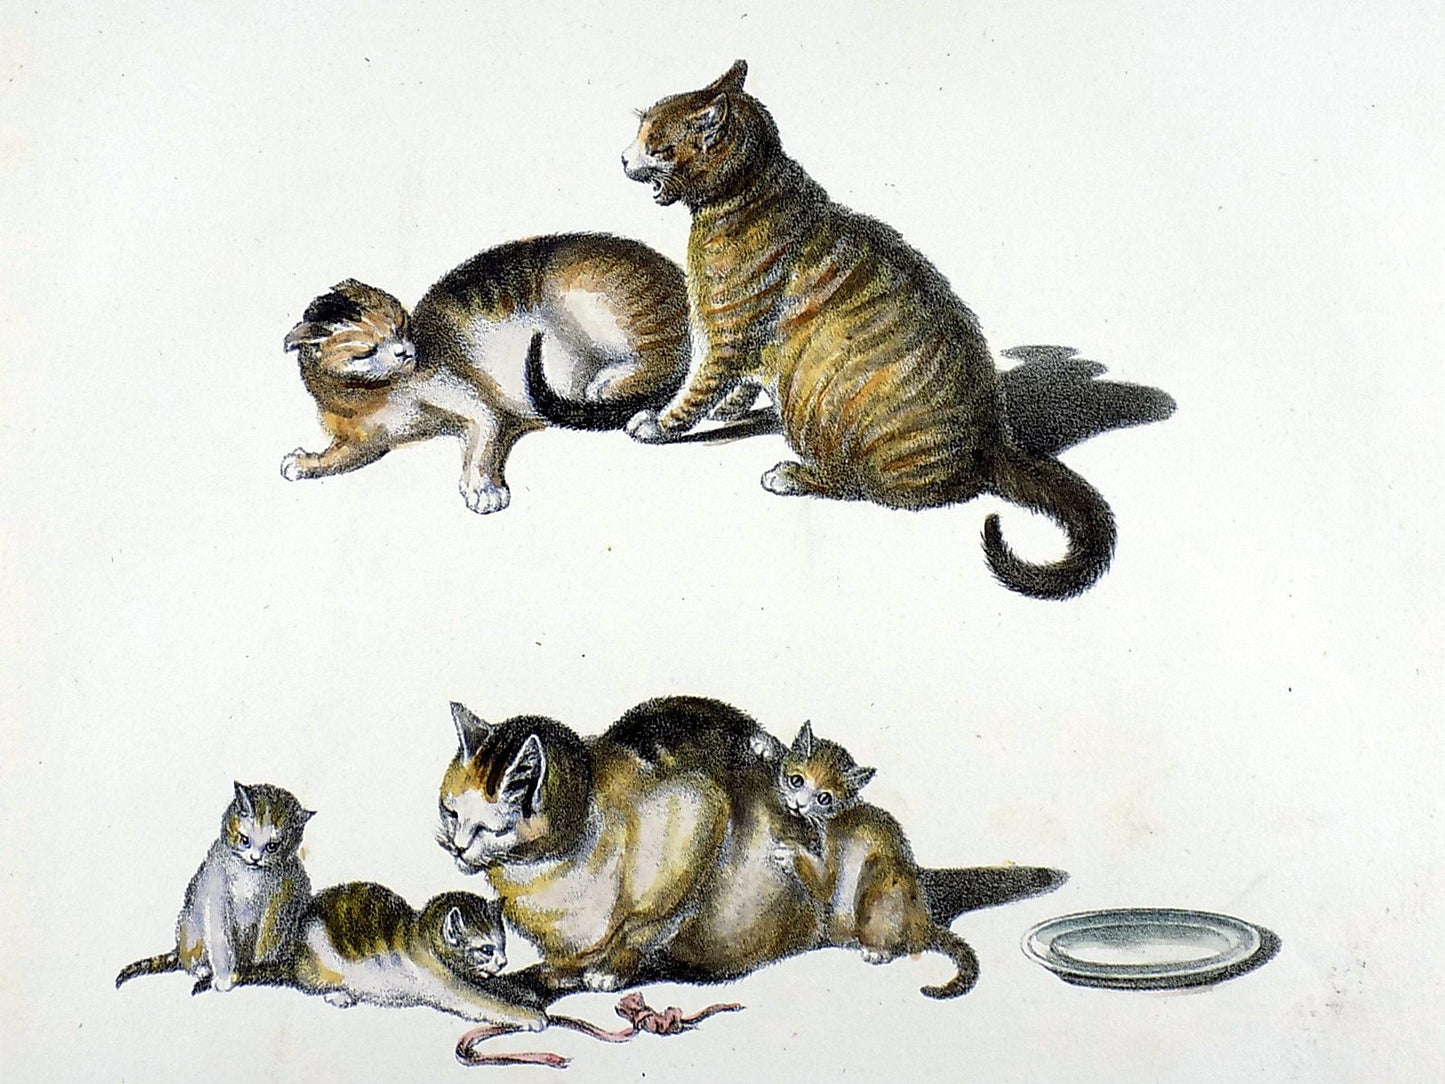 1824 Domestic Cats - Mammals - G. Mind ; K.J. Brodtmann hand colored FOLIO lithography